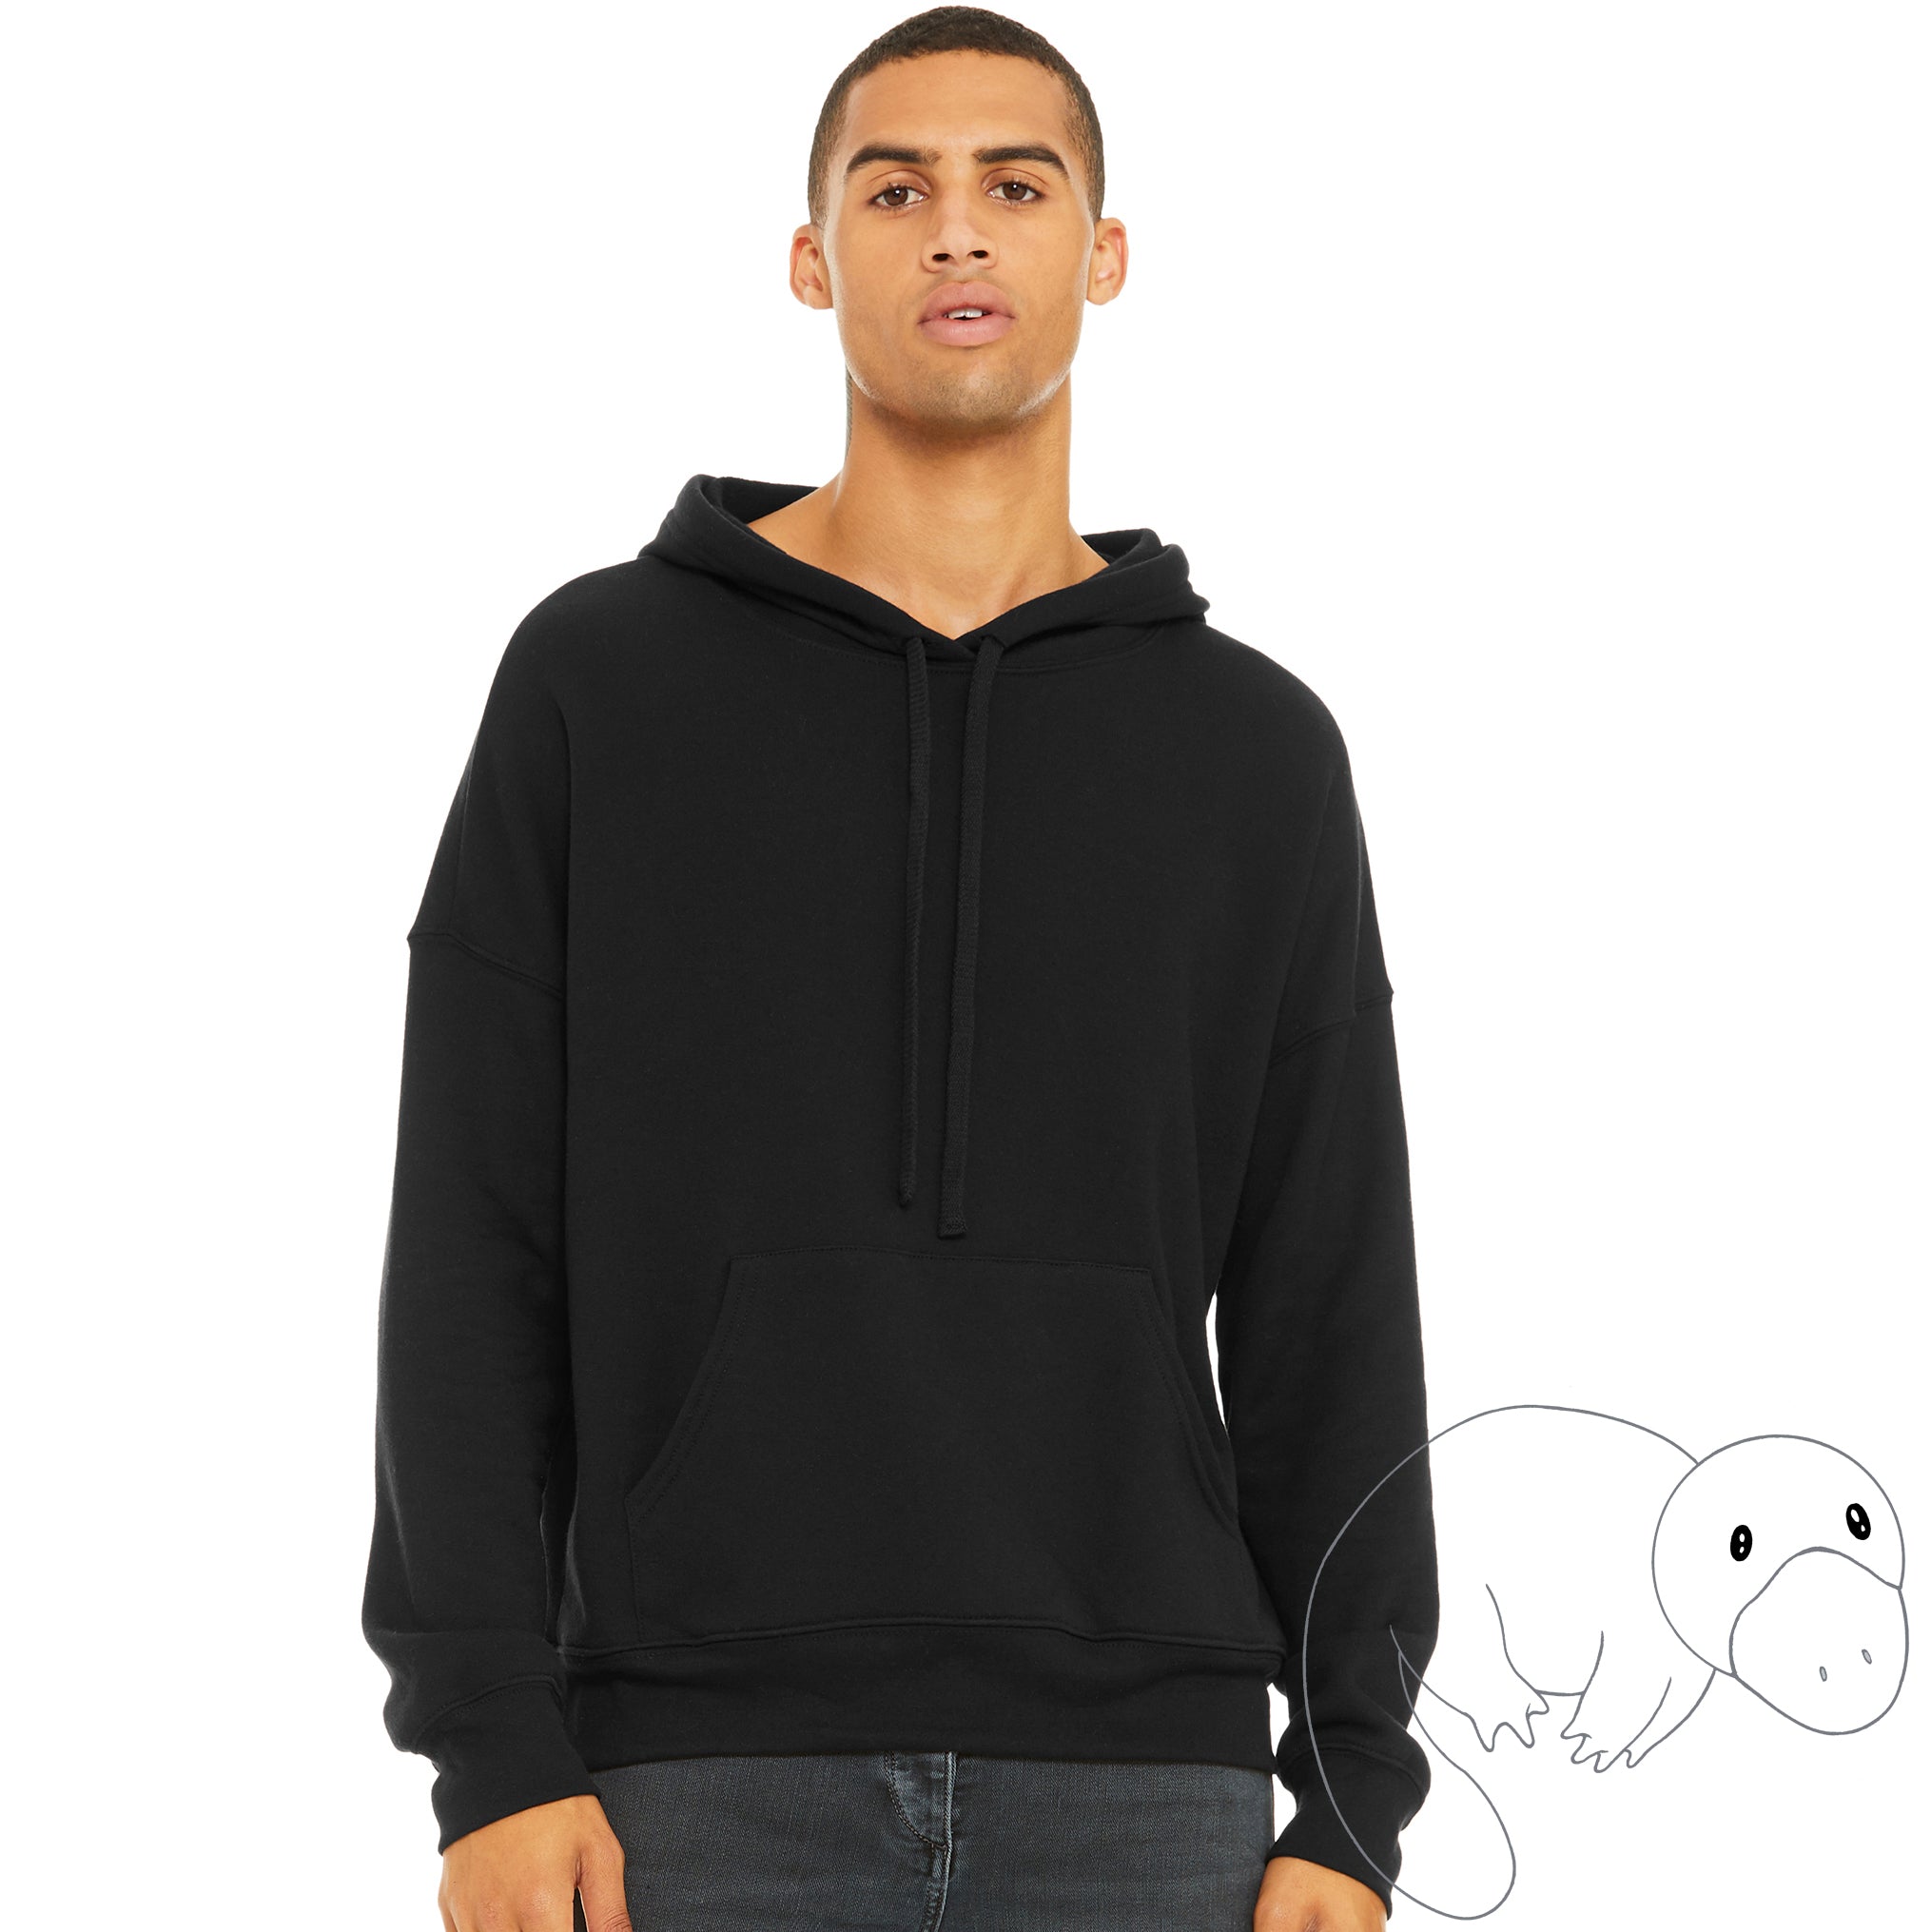 new-product-soft-sweatshirt-cozy-warm-dark-grey-black-hoodie-face-mask-Plats-Hoodie-facemask-all-in-one-convertible-plats-hoodie-platinum-platypus-guy-millennial-boy-man-beautiful-eyes-blue-green-young-cute